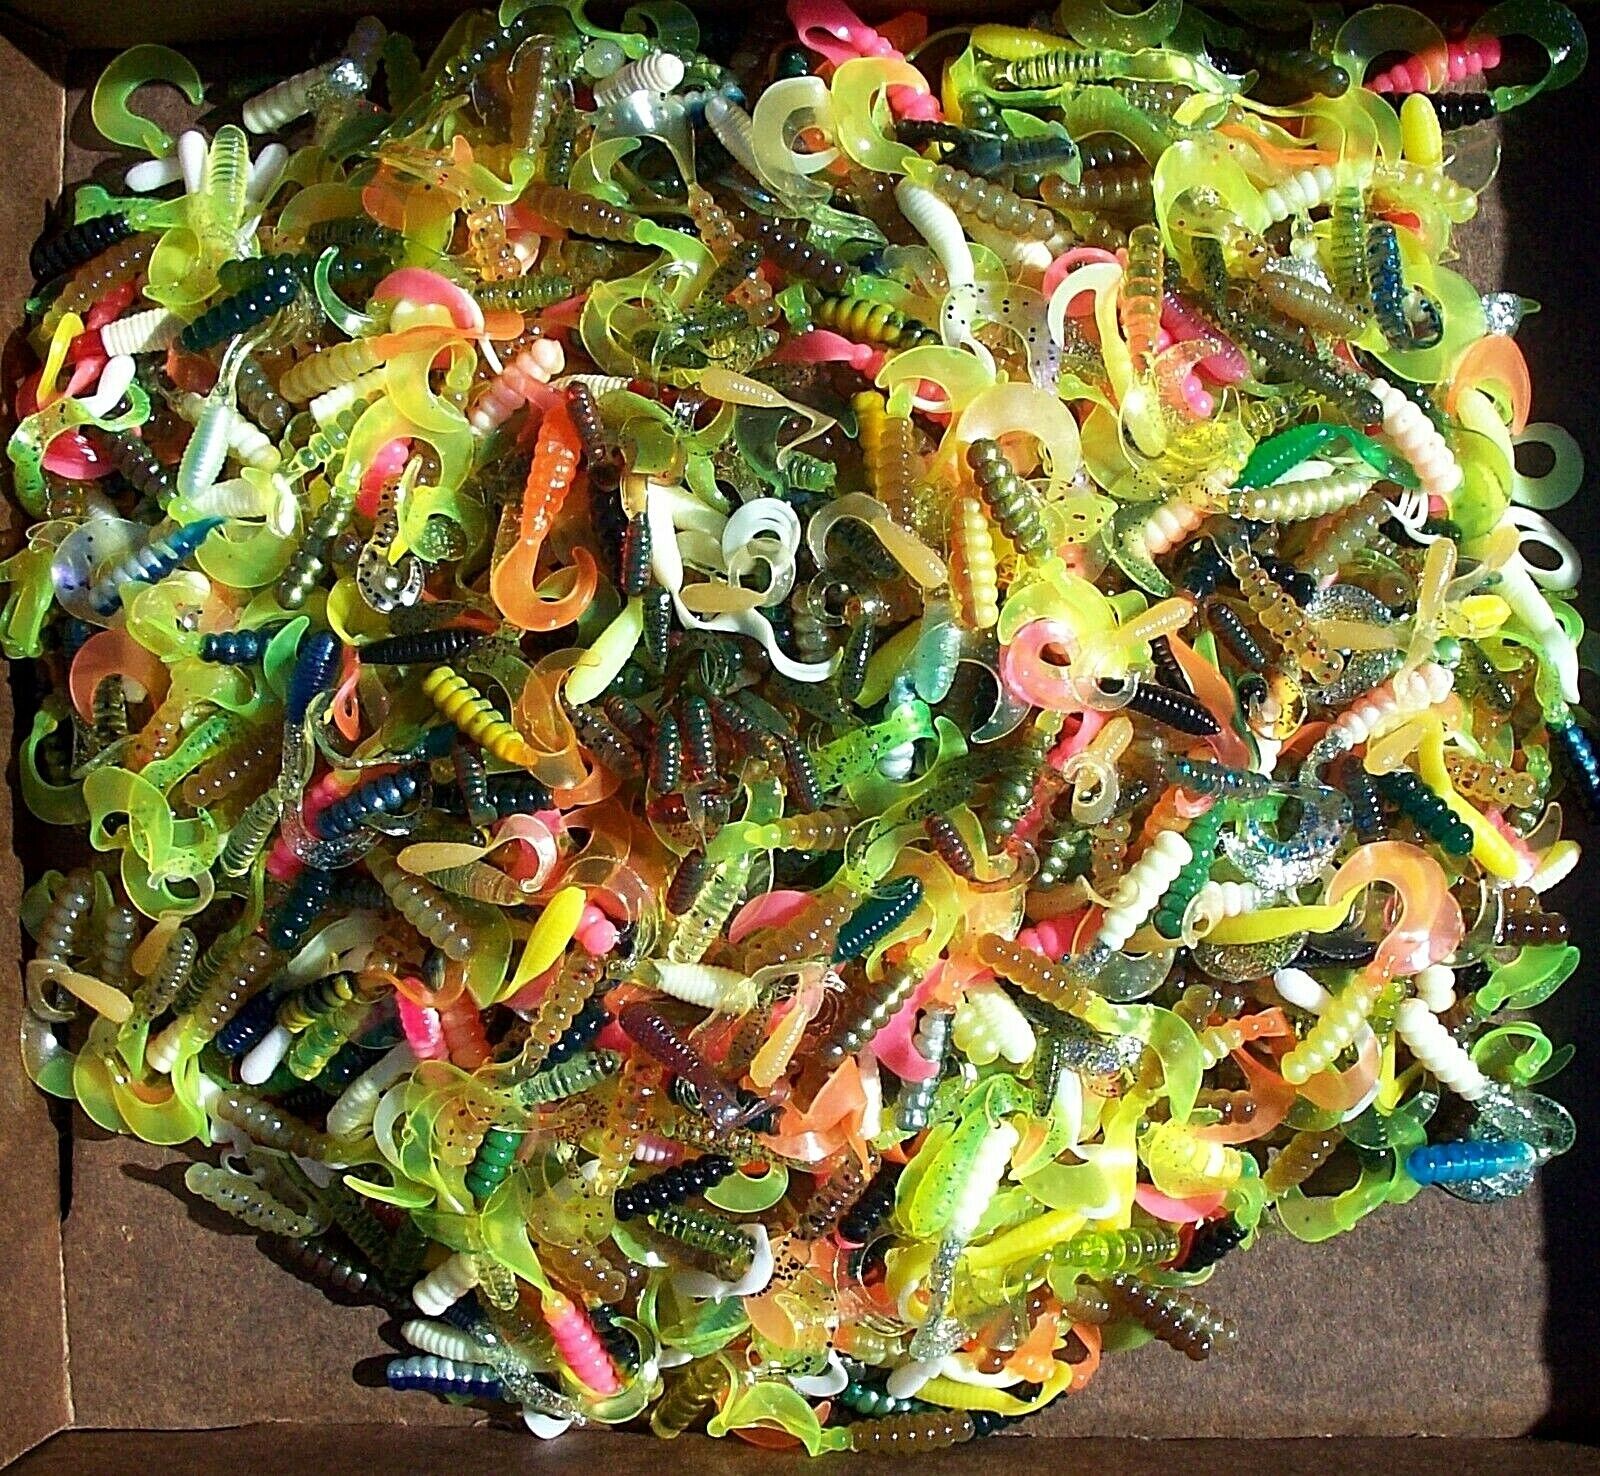 100pc PANFISH ASSORTMENT 1" to 2" SOFT PLASTIC BAITS Crappie Fishing Lures Trout All American Tournament Quality Soft Plastic Baits 100ctPanfishAsst - фотография #7